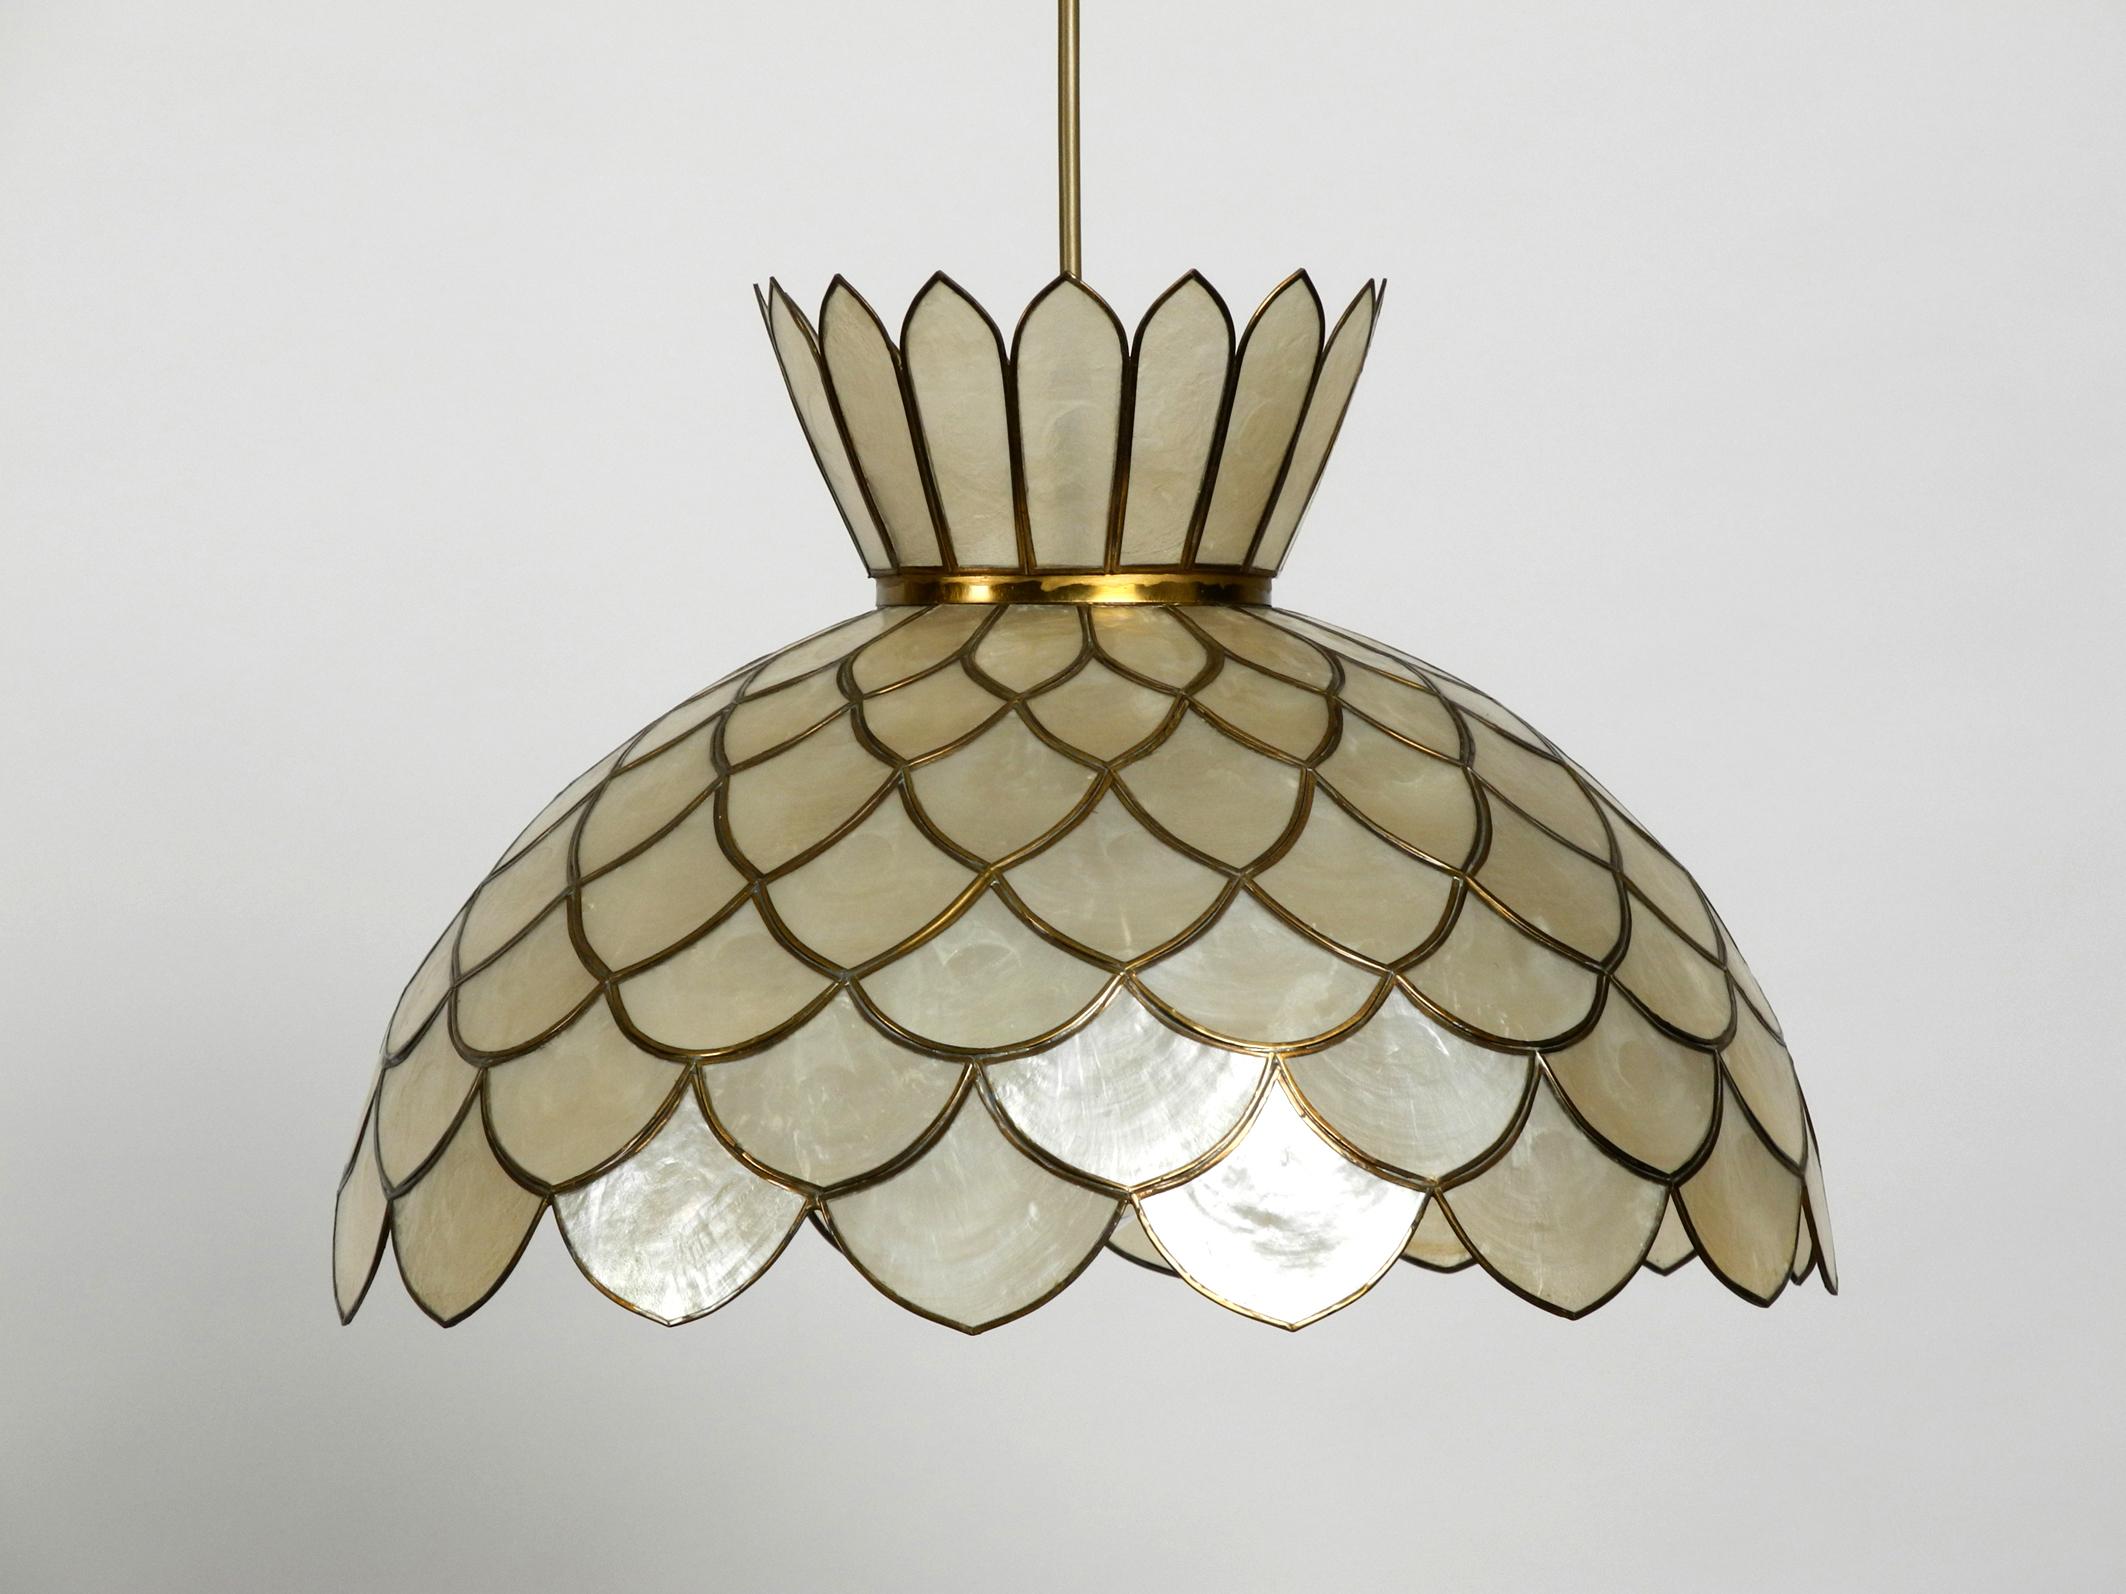 Very elegant flowers pendant lamp made of mother of pearl. 
Great rare design from the 1970s. Very high quality workmanship. 
Pleasant light with the original E27 socket. No damage to the entire lamp. 
All leaves firm and complete. Just one